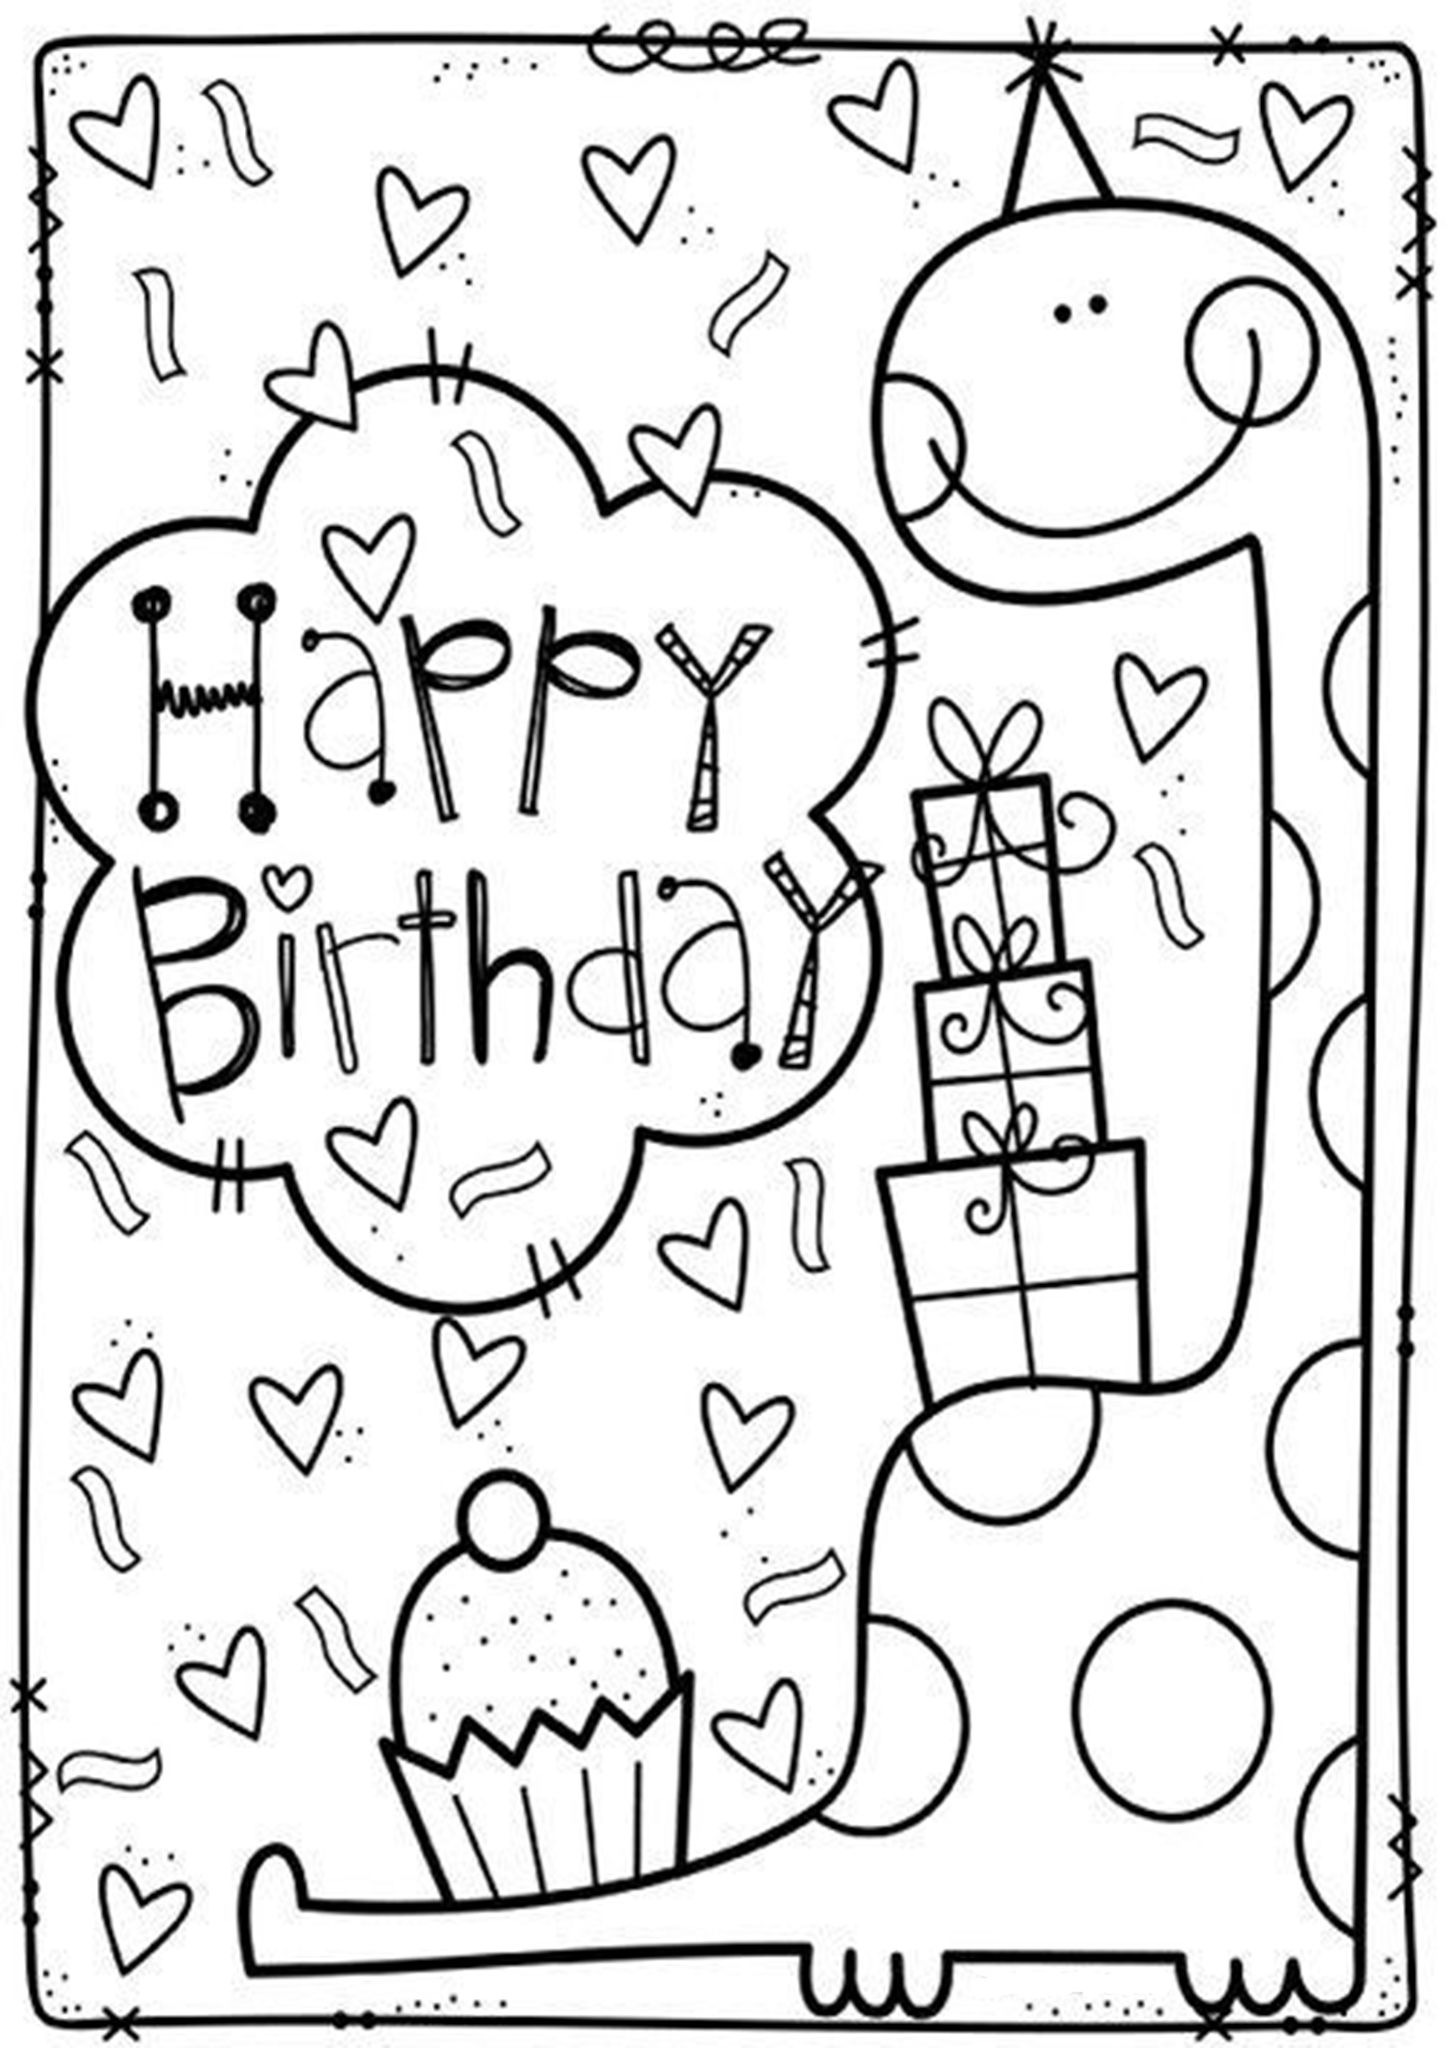 Free & Easy To Print Happy Birthday Coloring Pages | Birthday coloring pages,  Happy birthday coloring pages, Dinosaur coloring pages